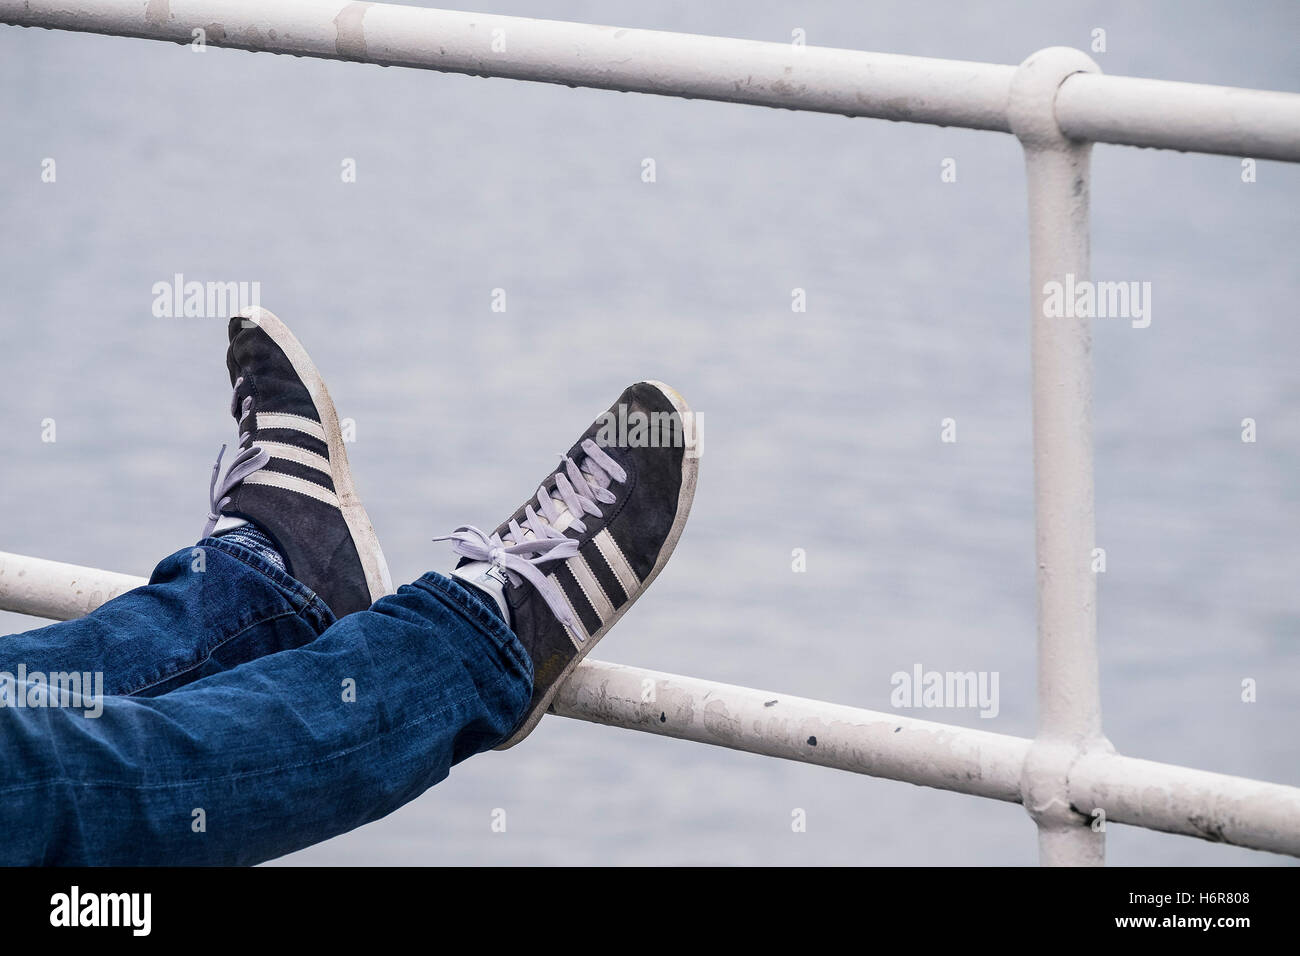 A holidaymaker relaxes with his feet up on railings in Falmouth, Cornwall. Stock Photo